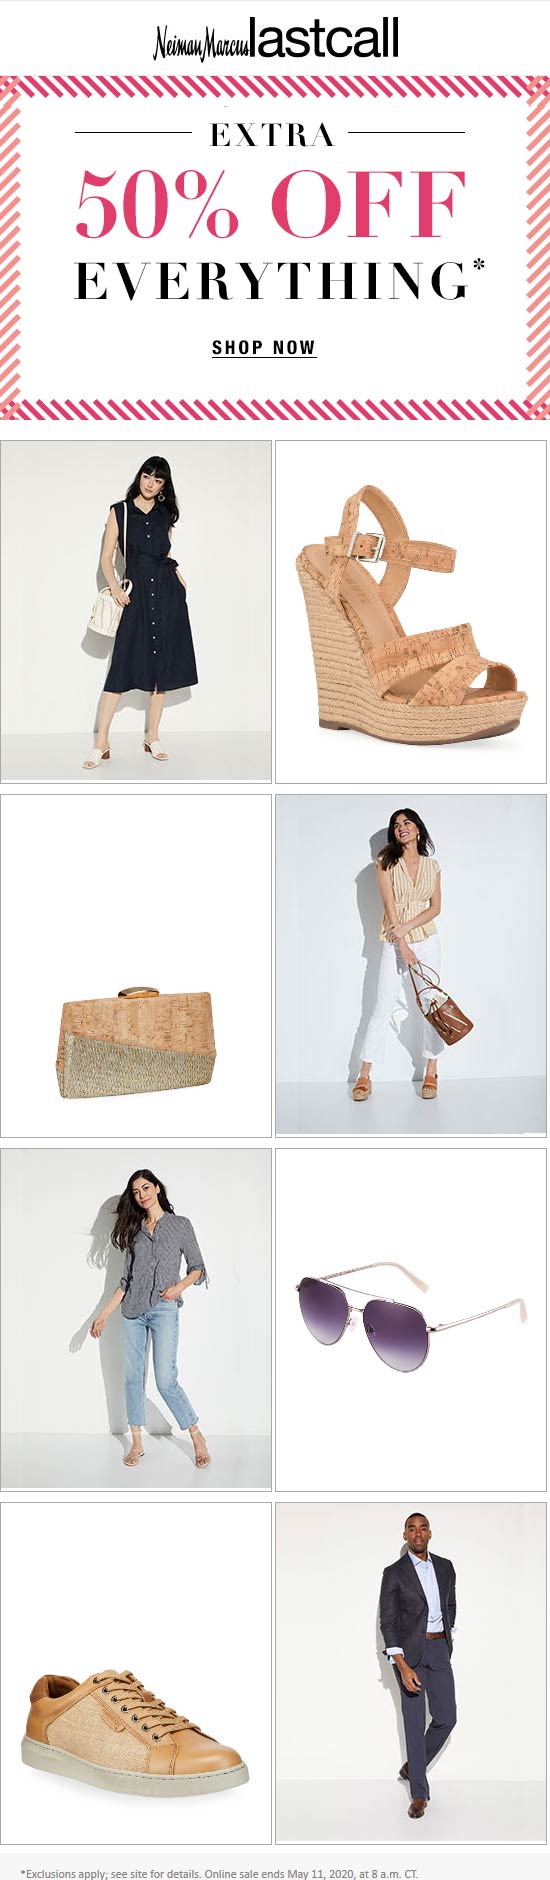 Last Call stores Coupon  Extra 50% off everything today at Neiman Marcus Last Call #lastcall